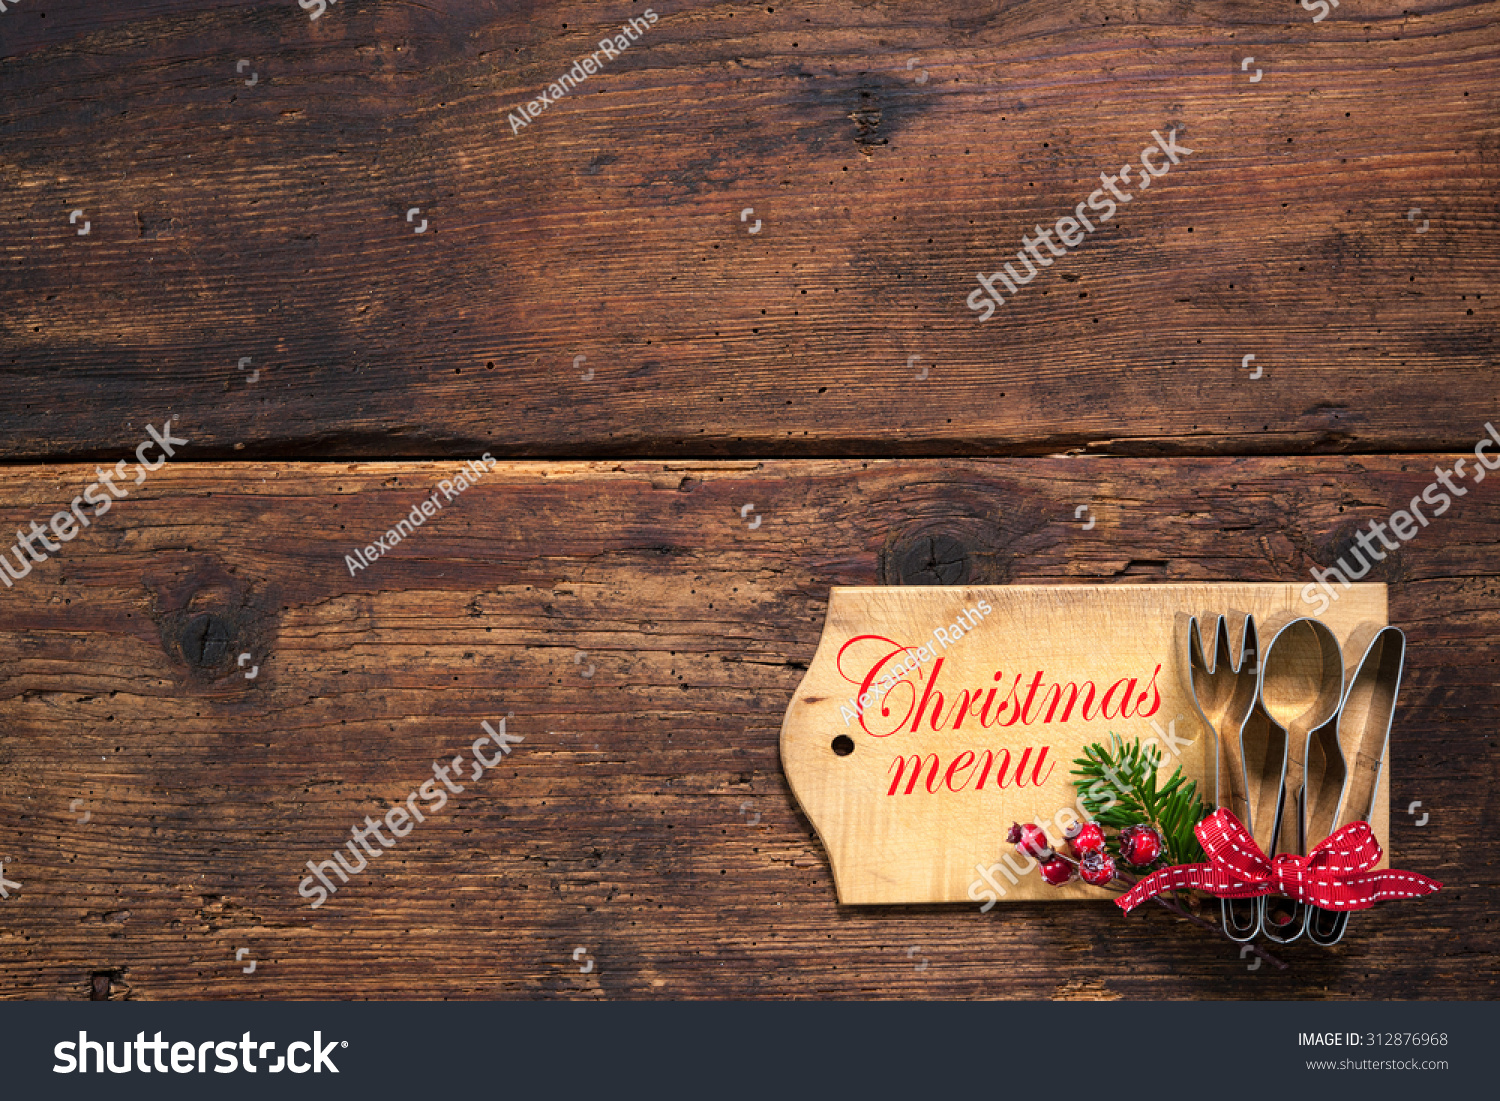 Christmas Menu Card For Restaurants On Wooden Background Stock Photo ...